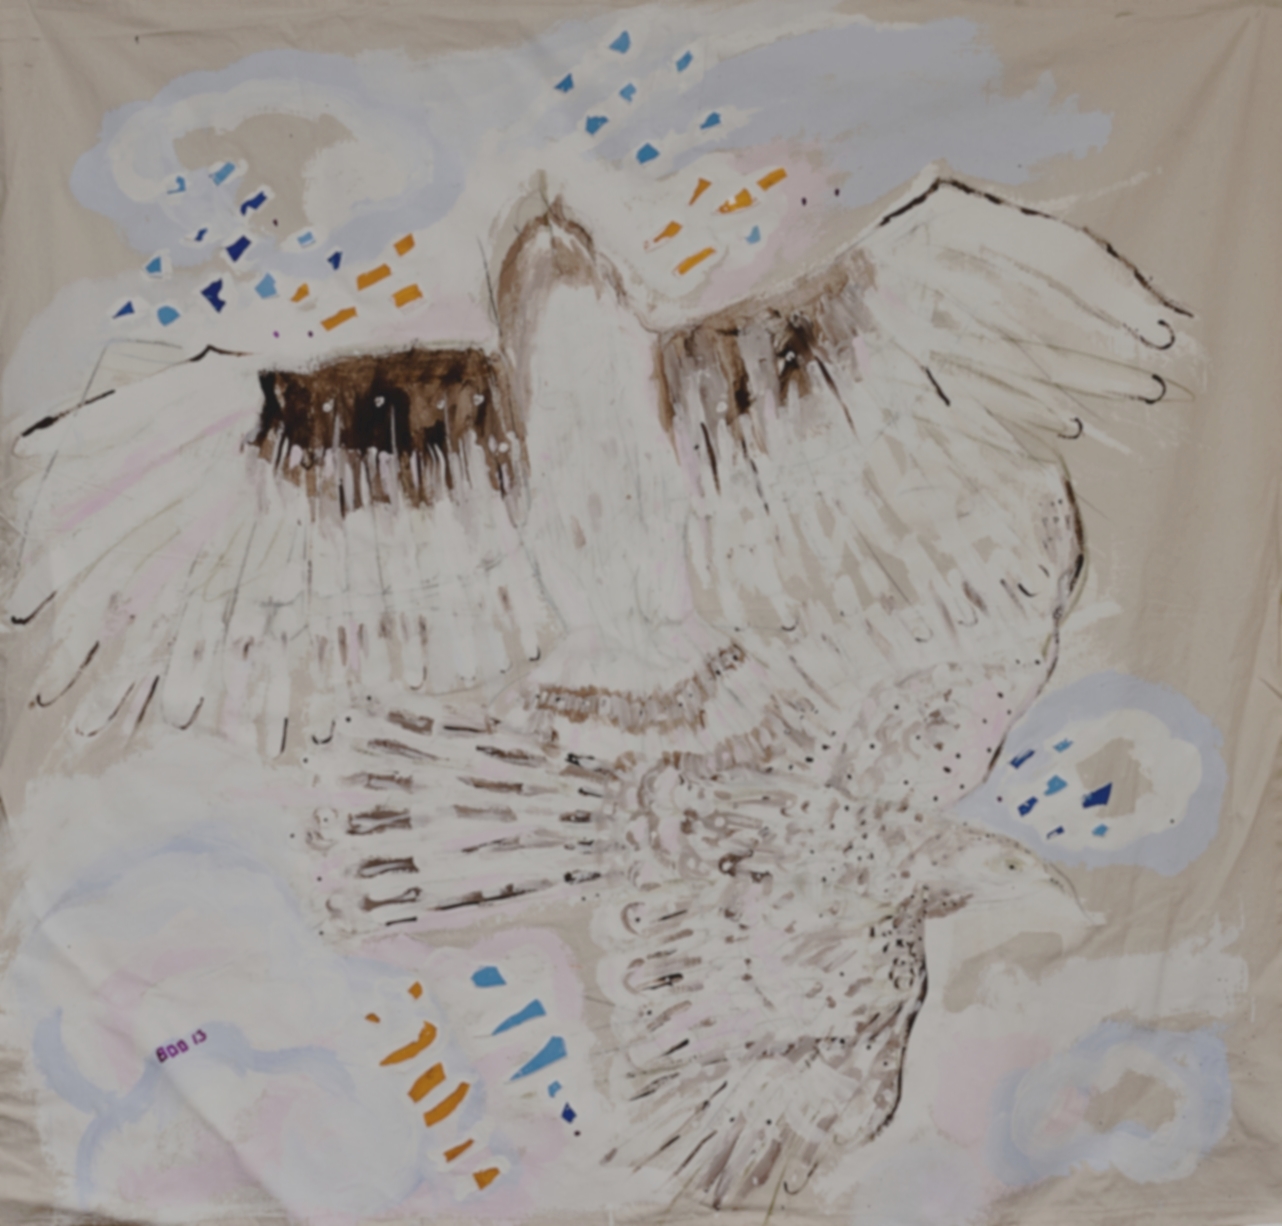 Airport Hawks(unfinished?), mixed media, 5ft x 5ft, 2013